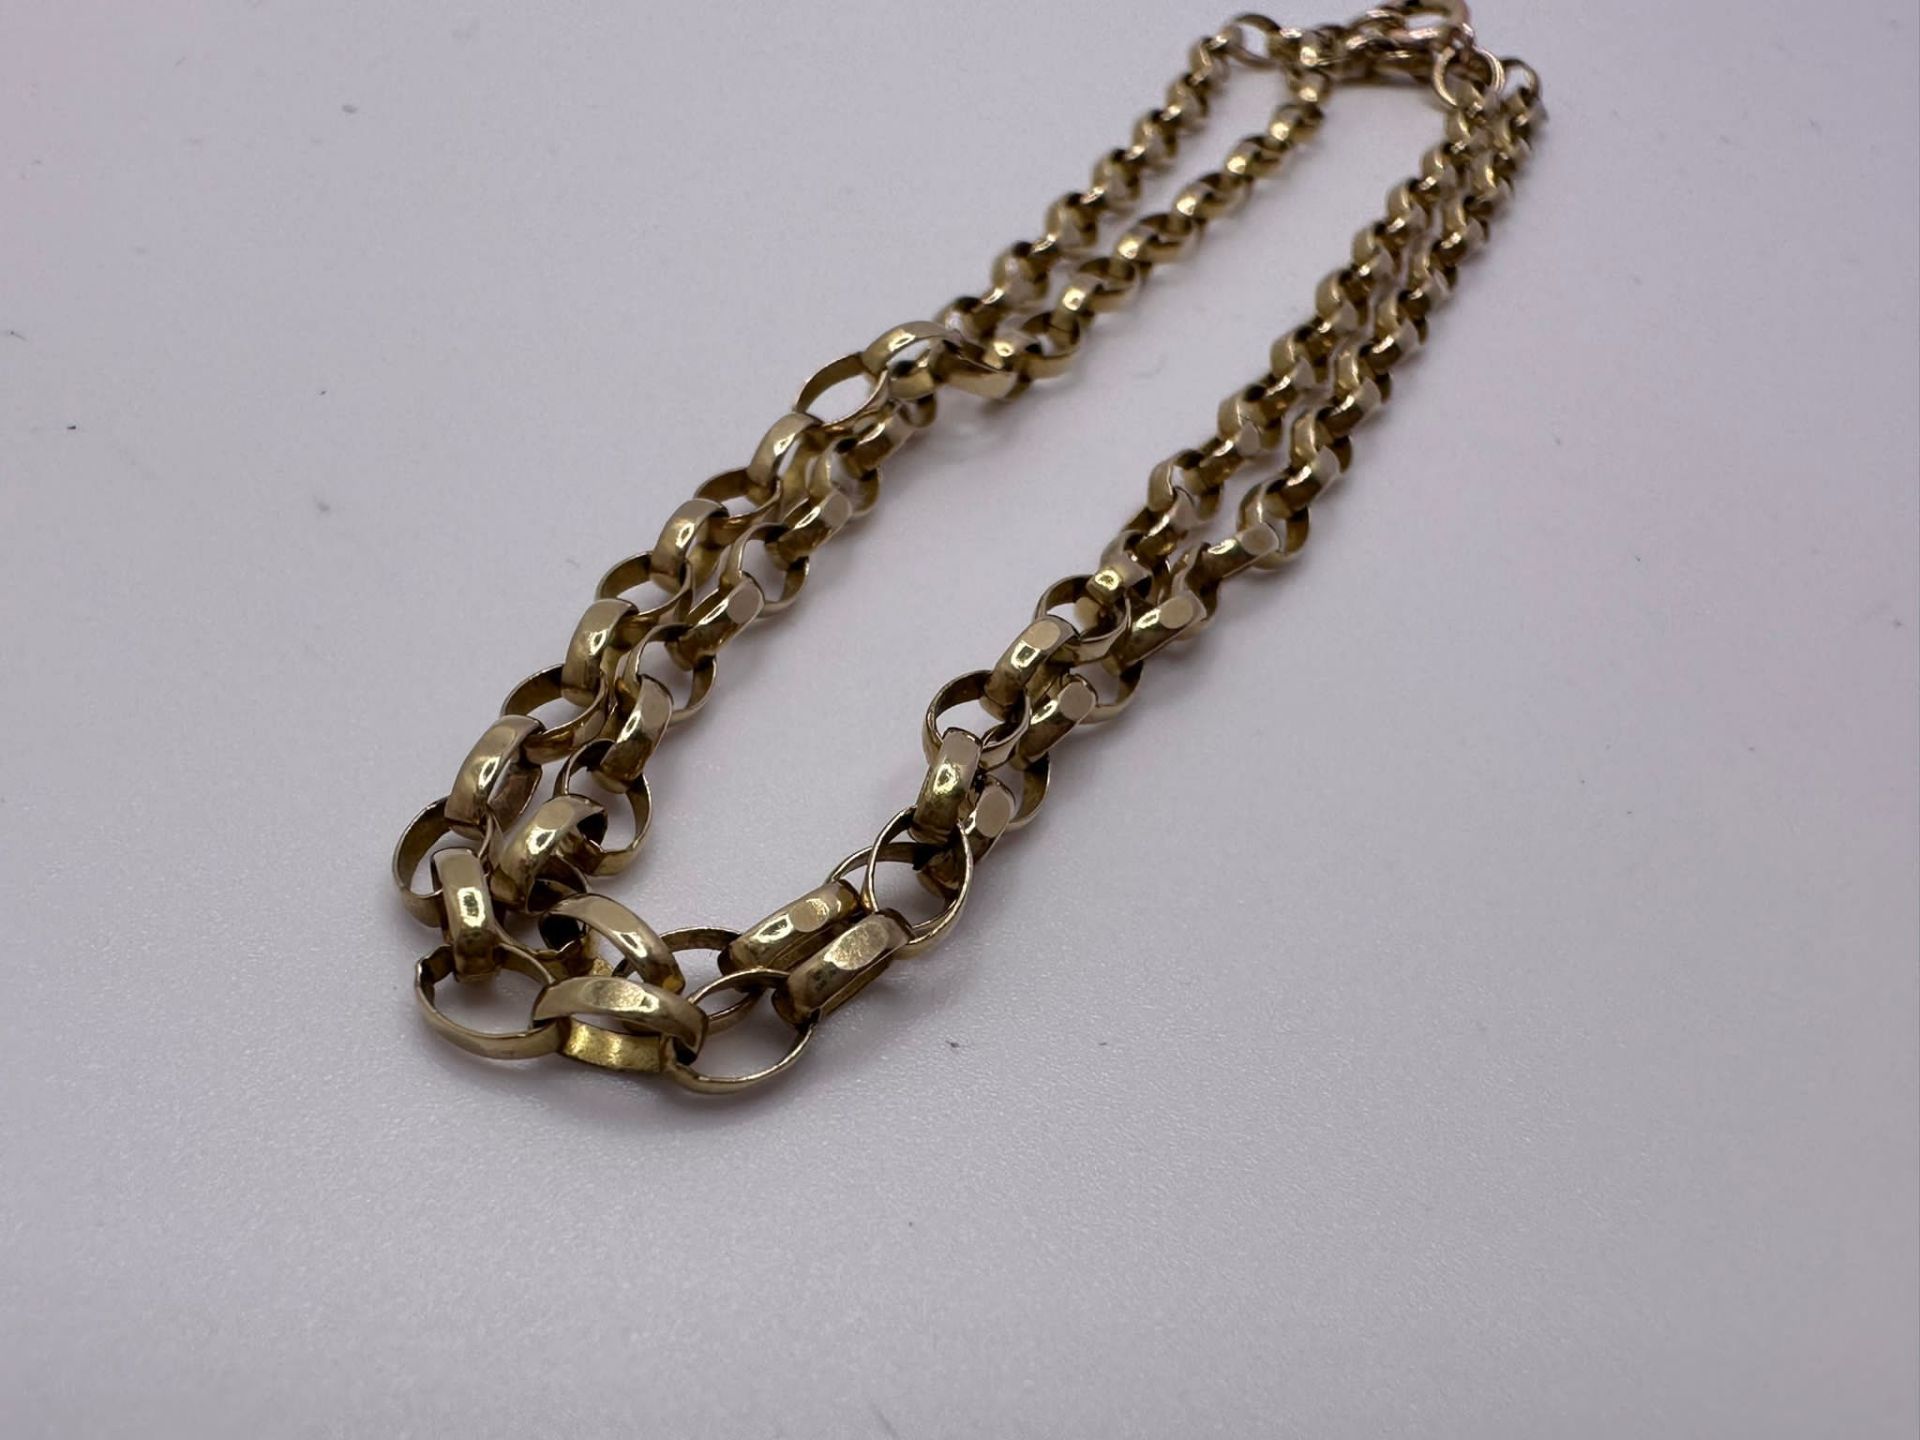 9ct gold belchar chain - Image 2 of 3